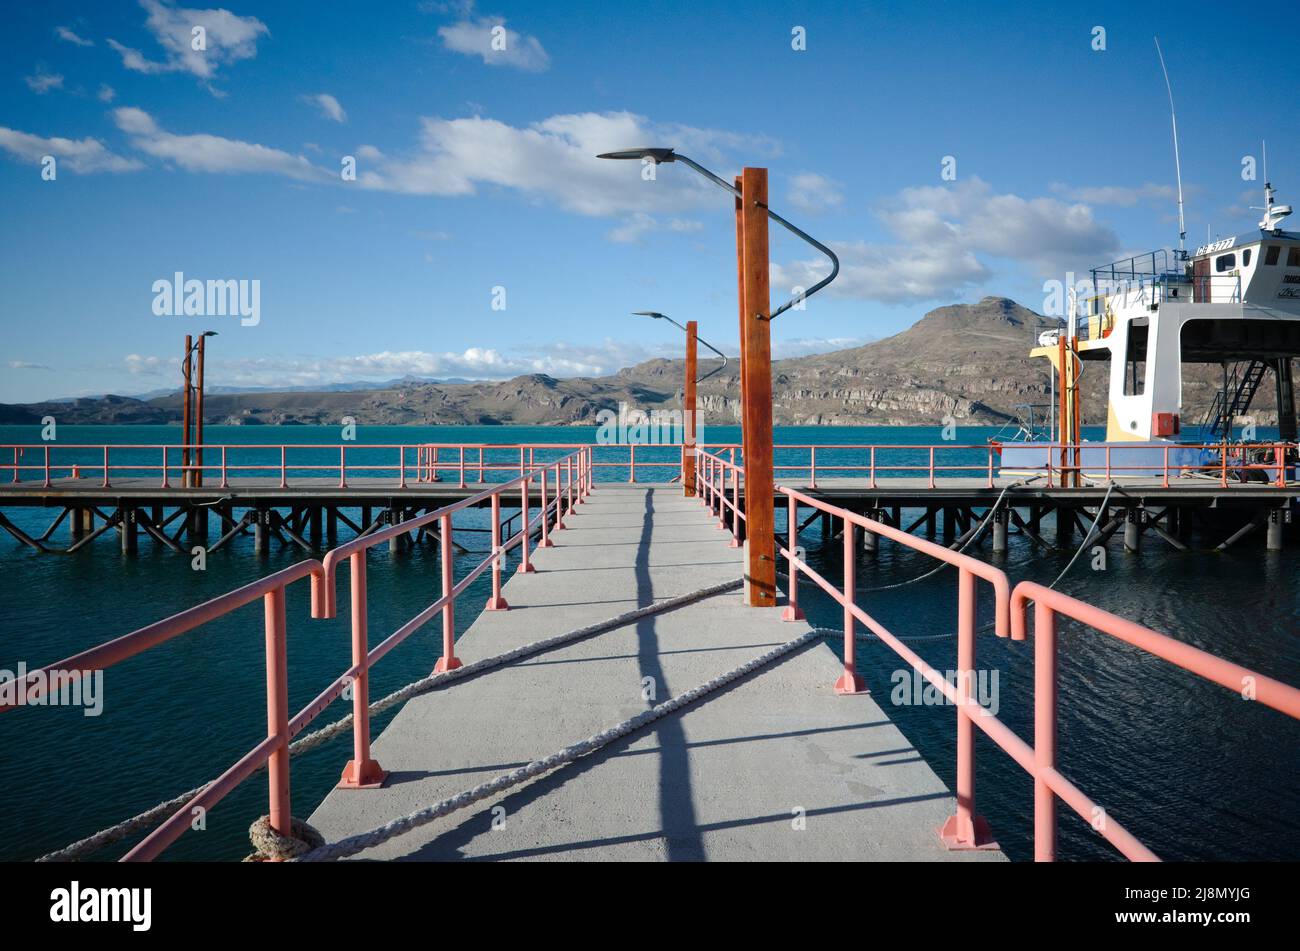 Entrance to jetty, on Lago General Carrera lake, Puerto Ibanez, Aysen, Chile. Pier with street lamps, mooring ropes crosses pier and moored ferry Stock Photo